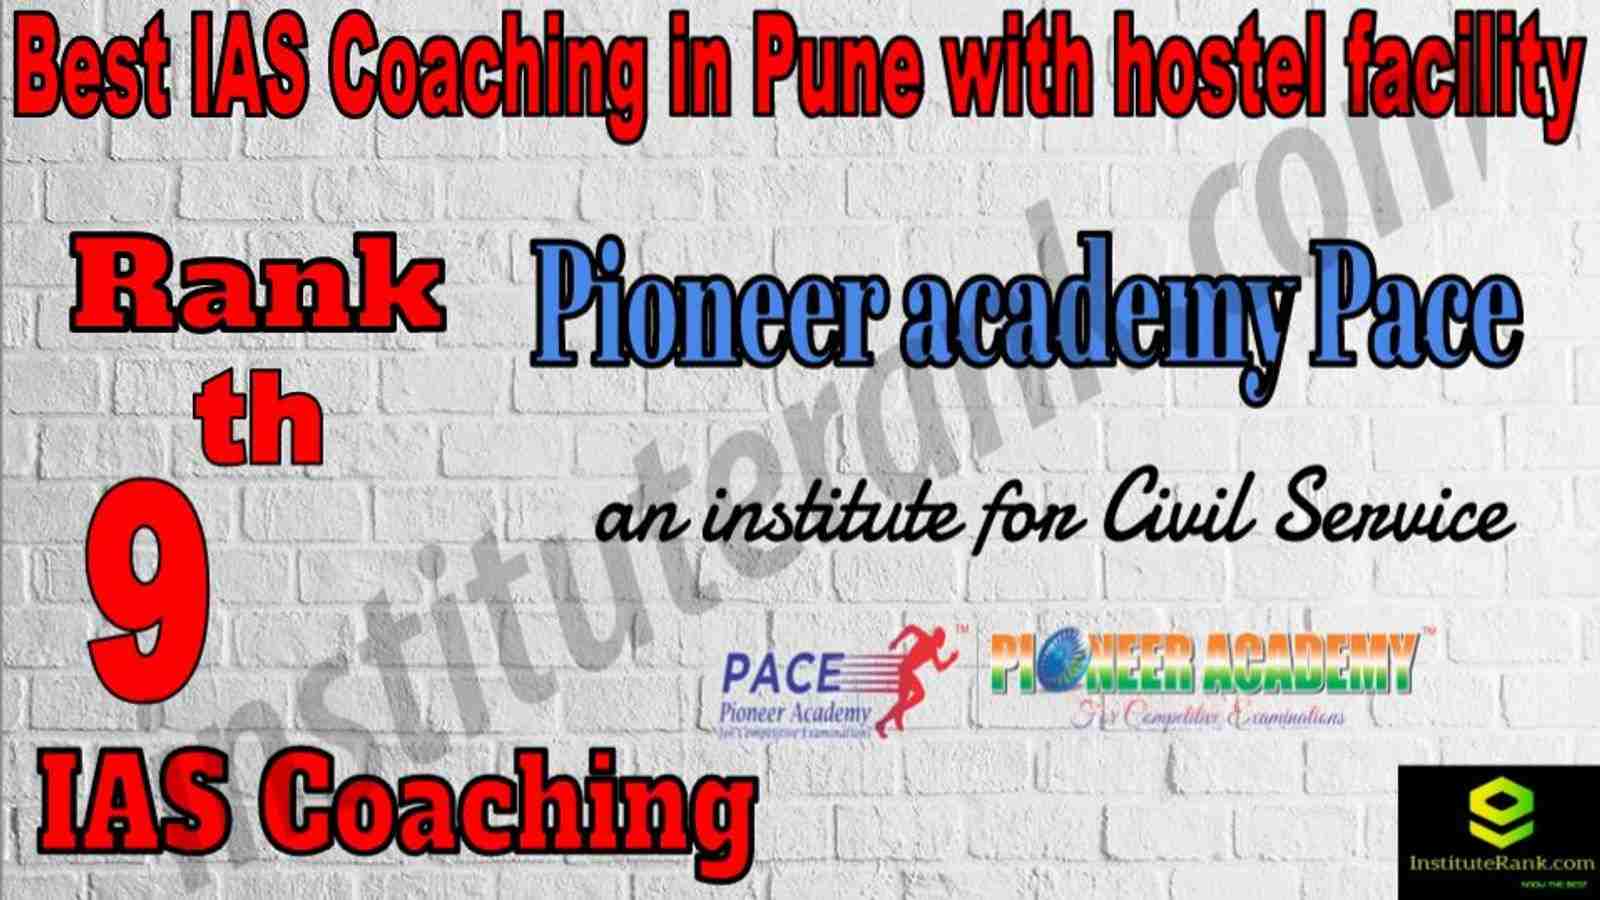 9th Best IAS Coaching in Pune with hostel facility